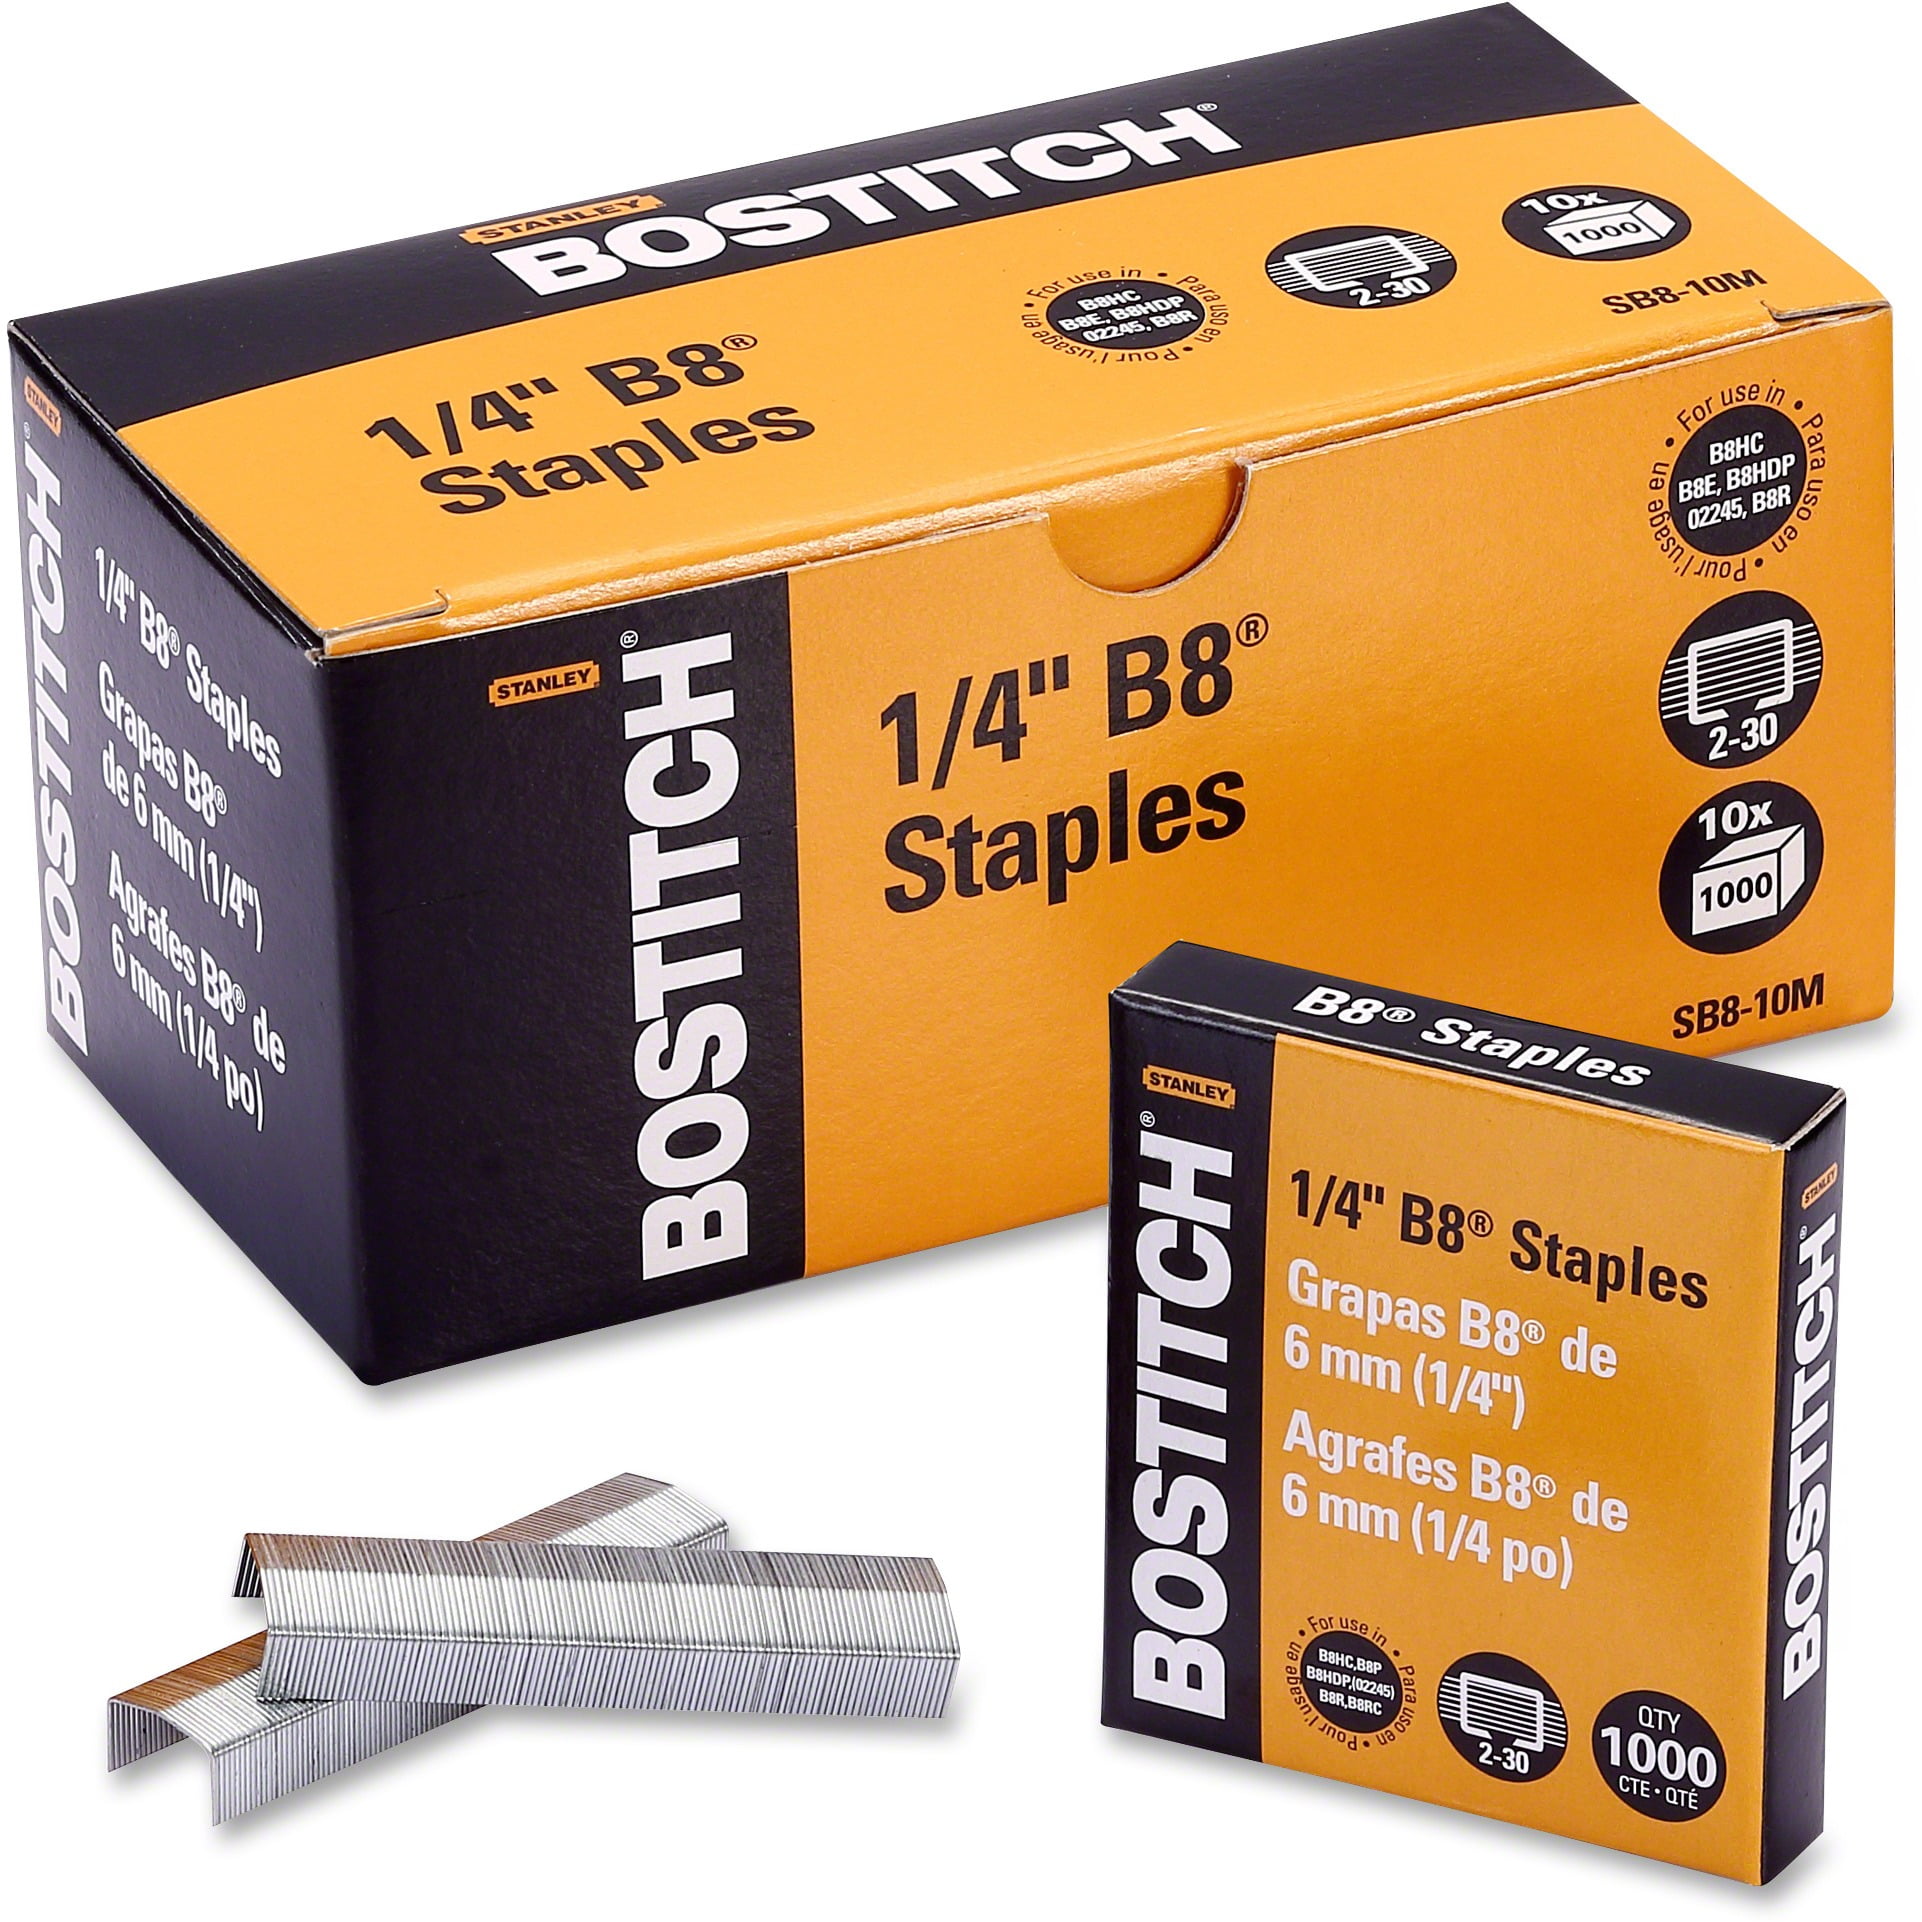 ST... Value Pack of 6 boxes Stanley Bostitch B8 PowerCrown Premium 1/4" Staples 